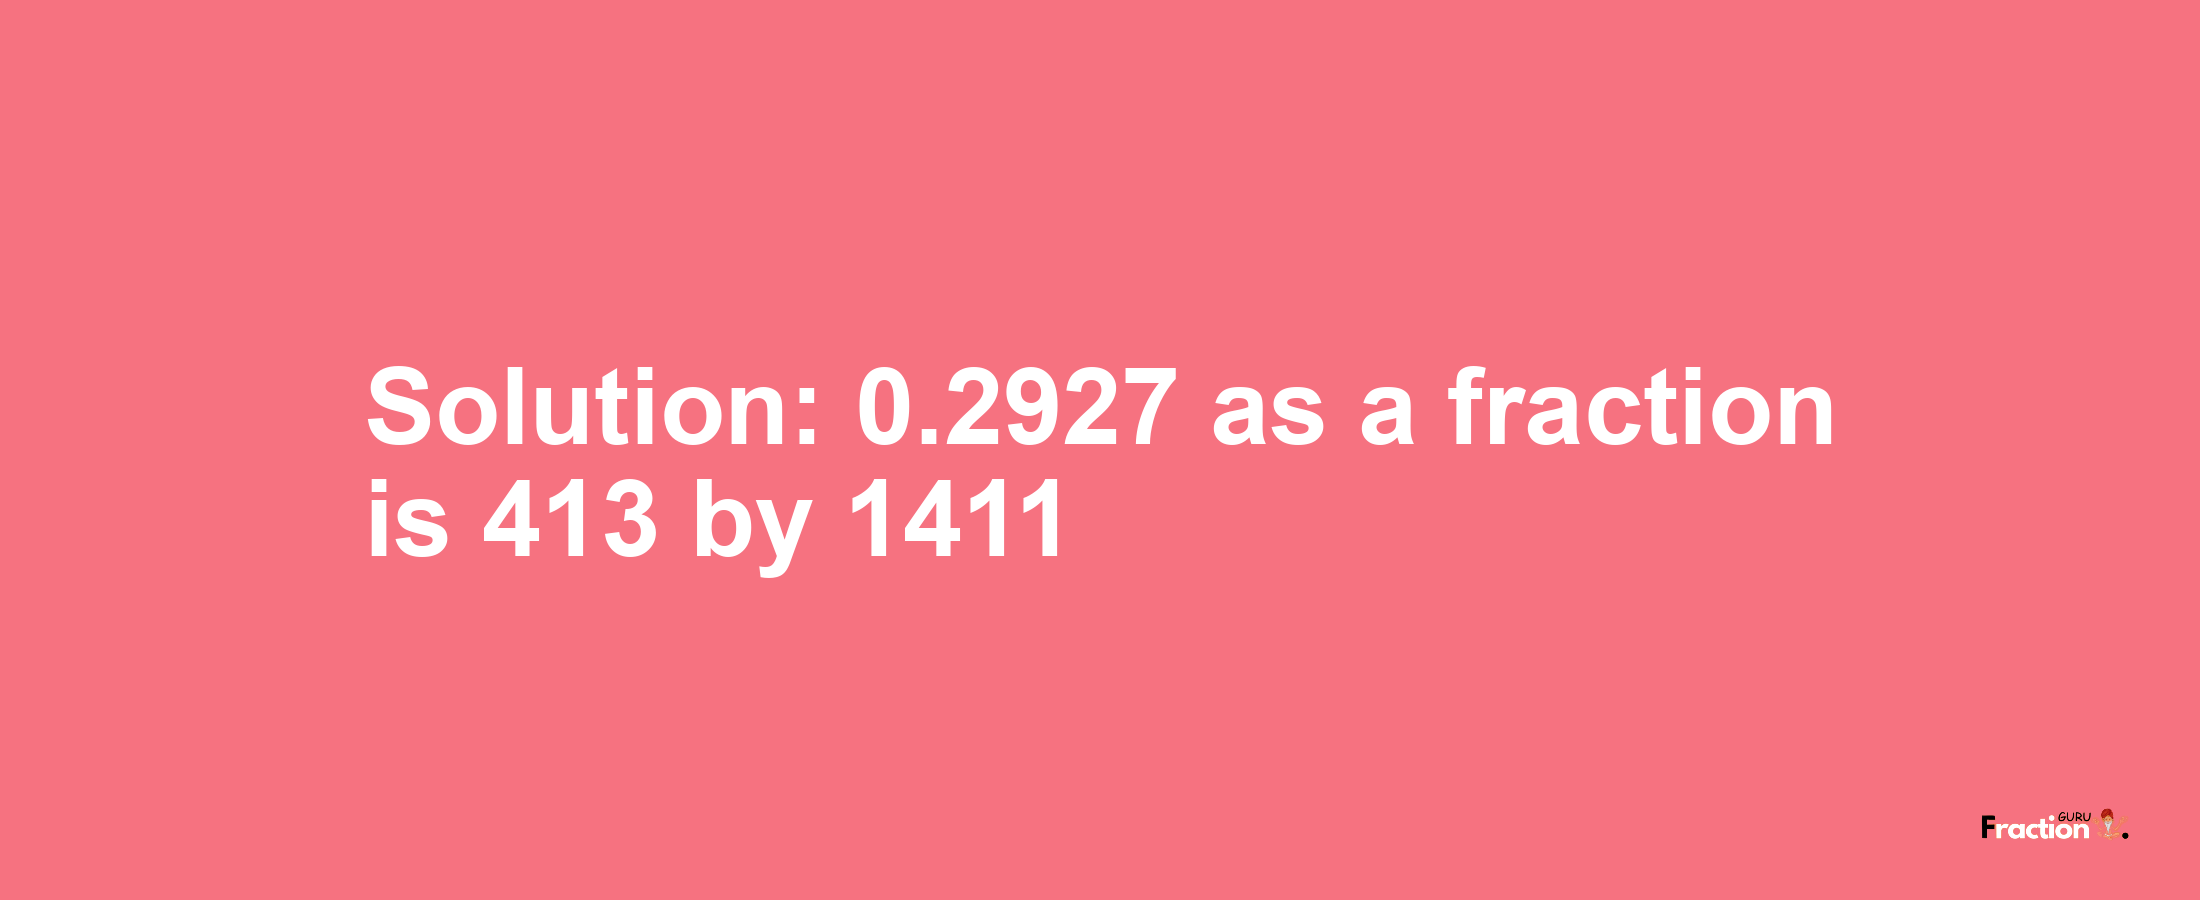 Solution:0.2927 as a fraction is 413/1411